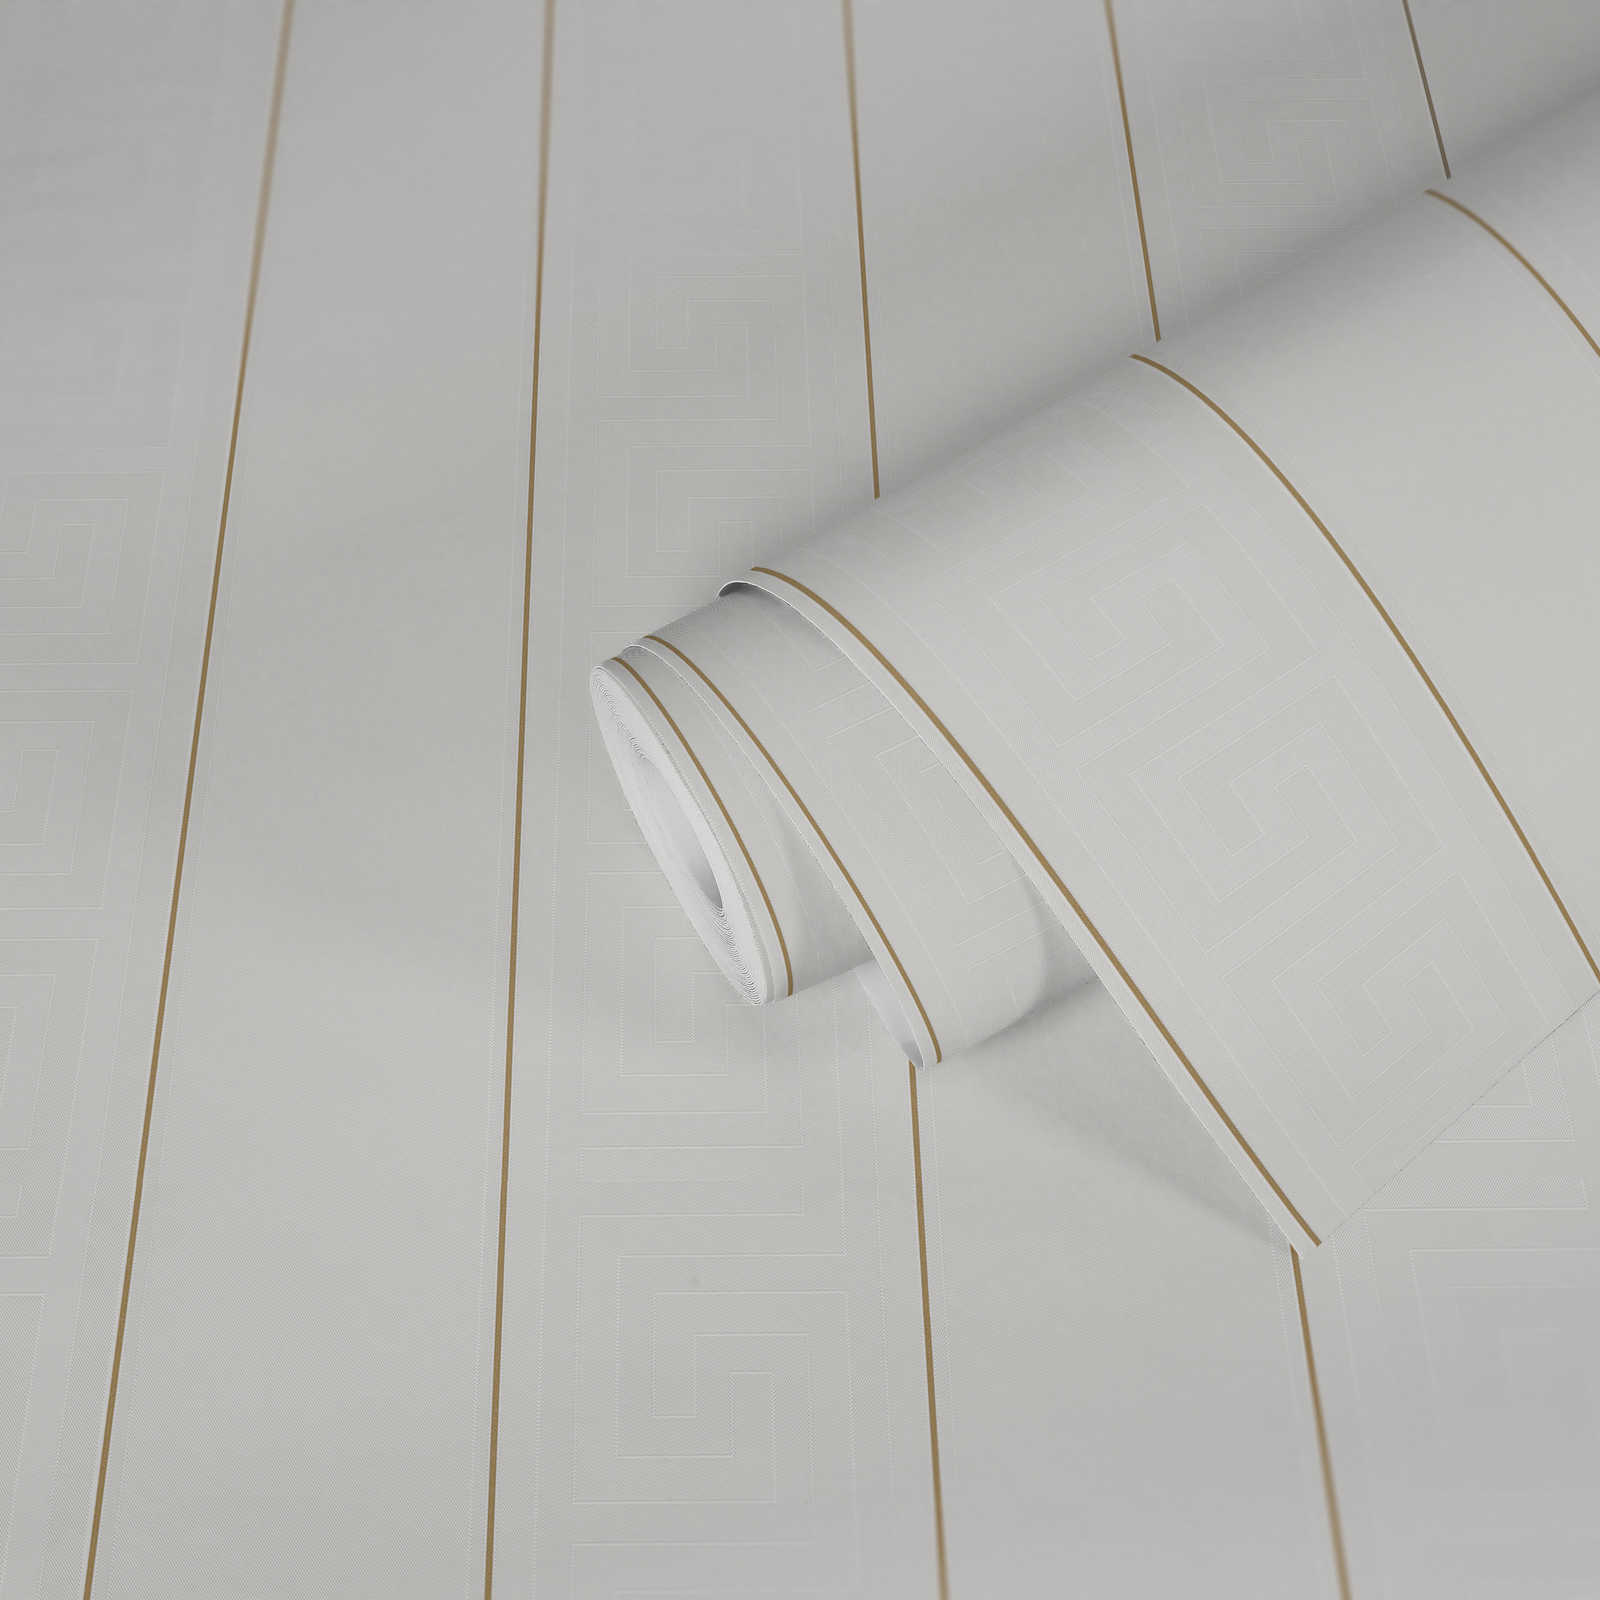             VERSACE wallpaper striped with meander pattern - white, gold
        